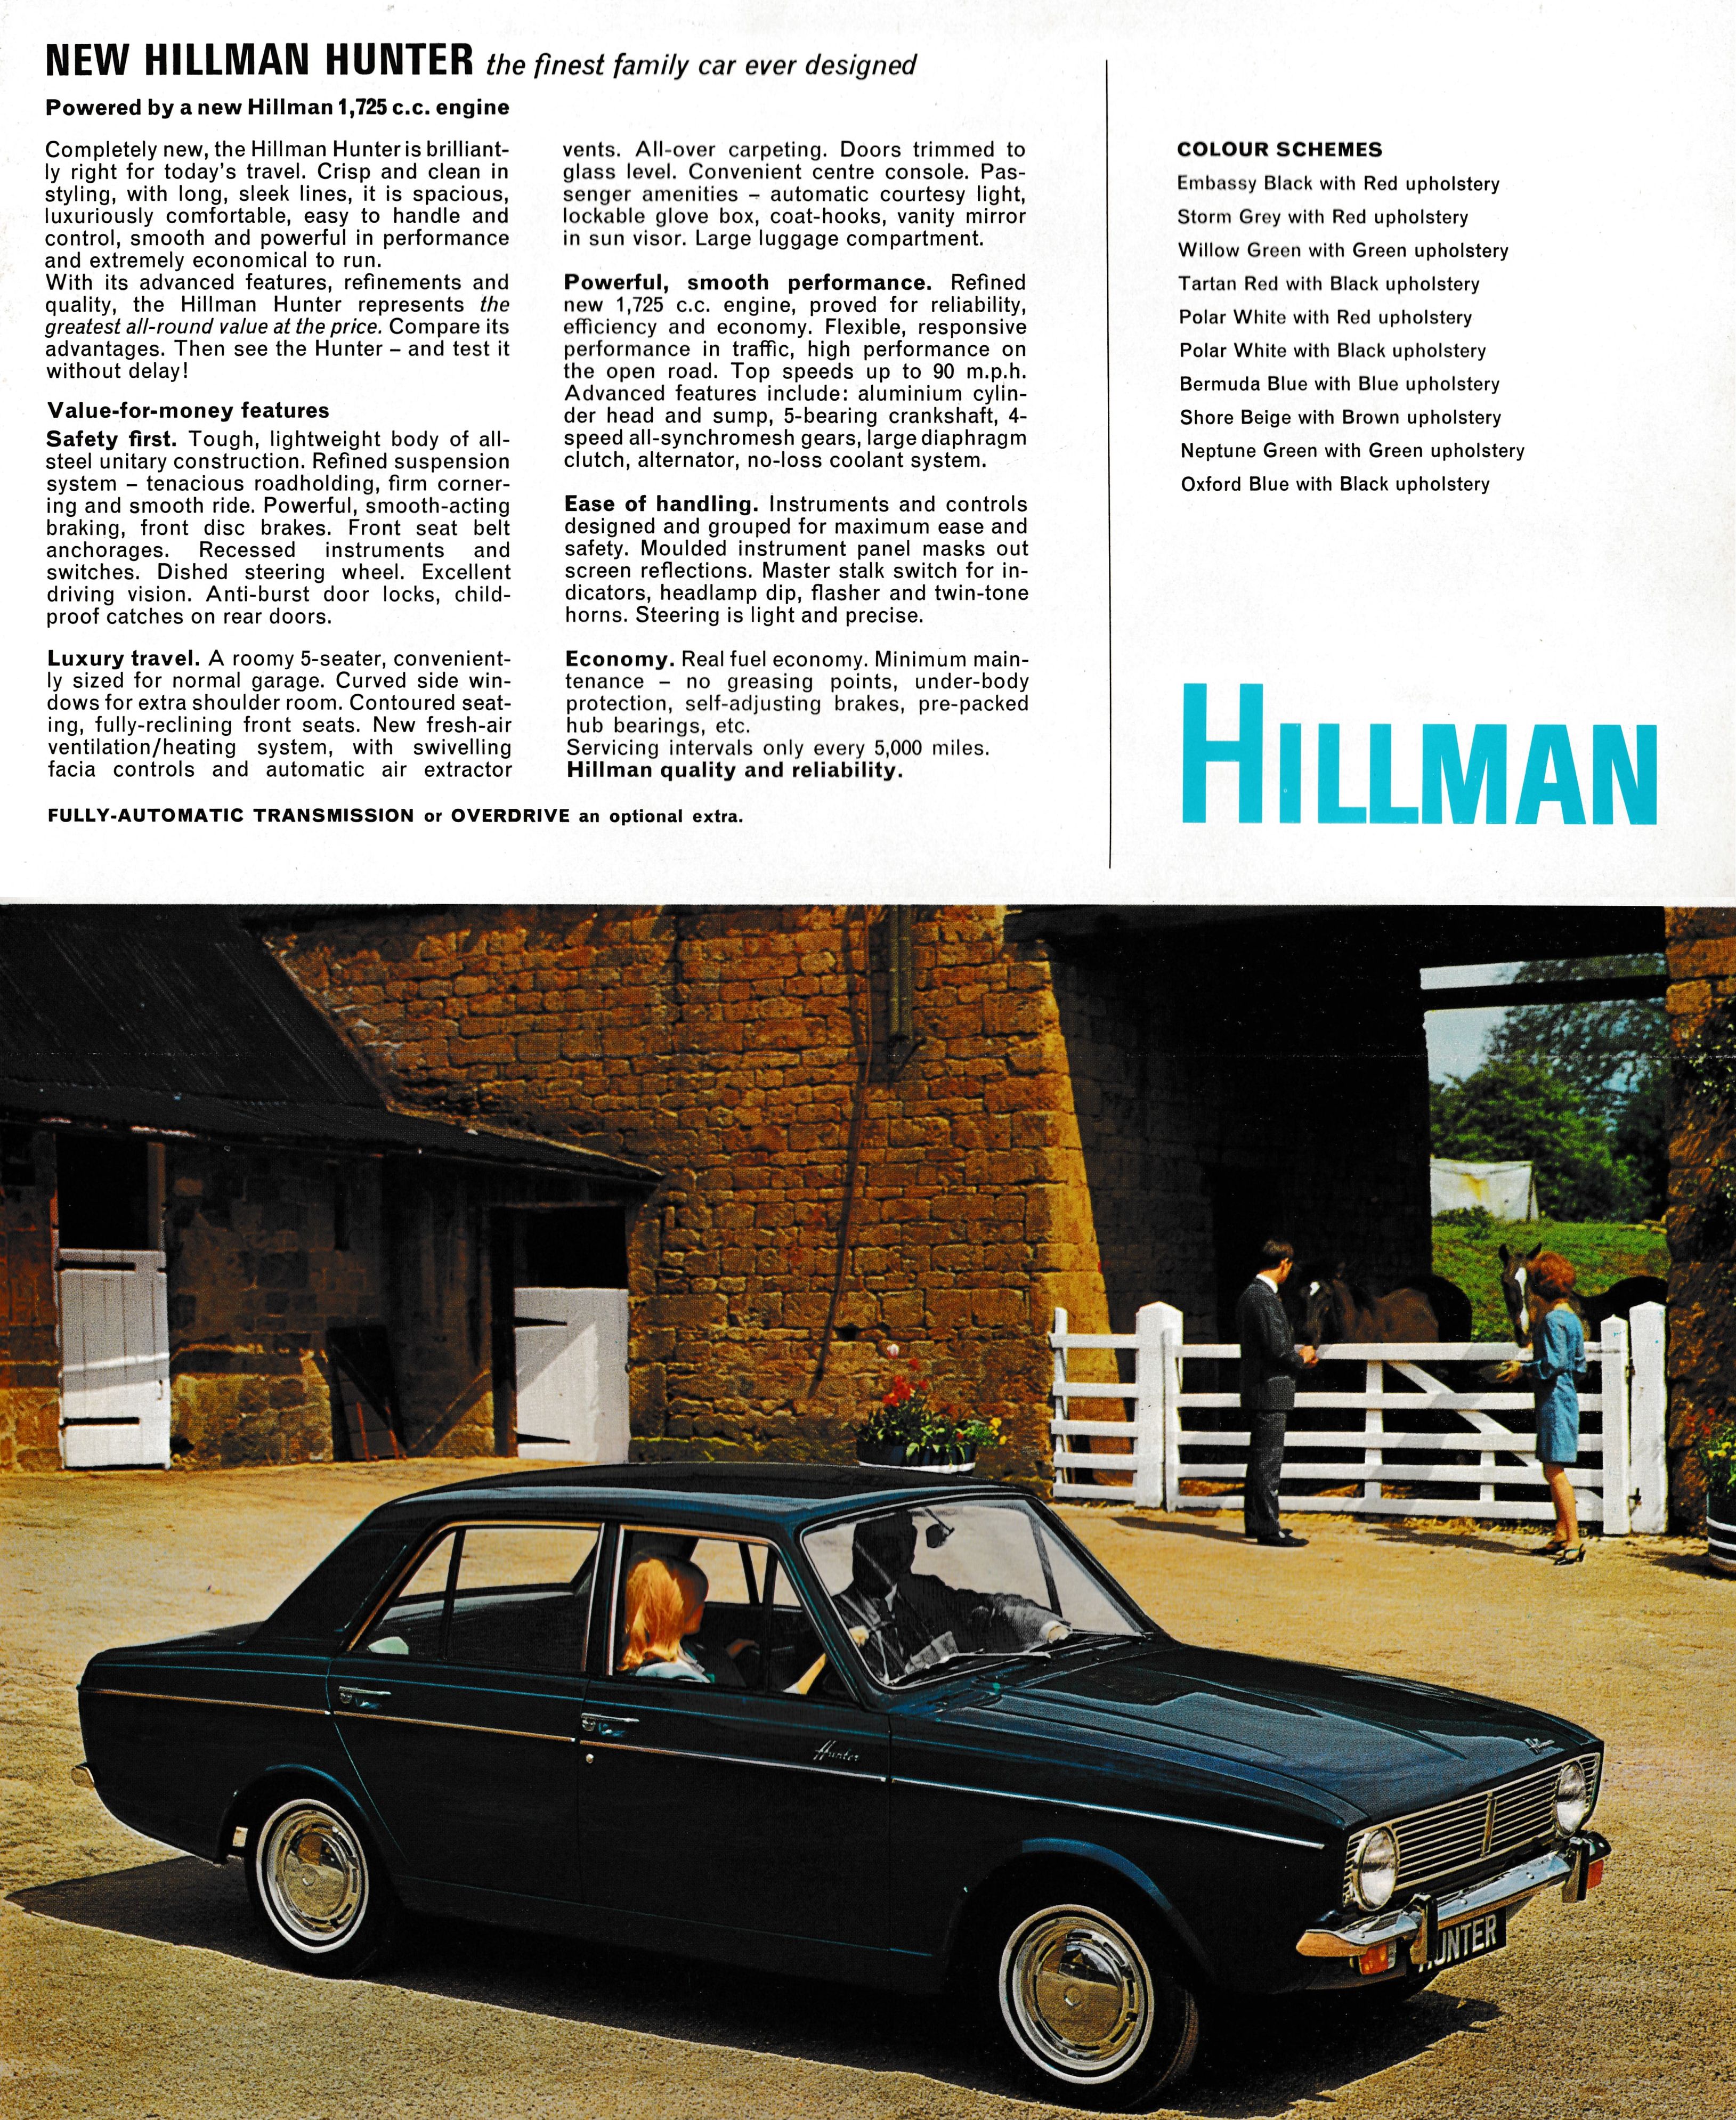 Interesting internet-pages / resources featuring automobile or motorsports content  - Page 6 1967%20Hillman%200607